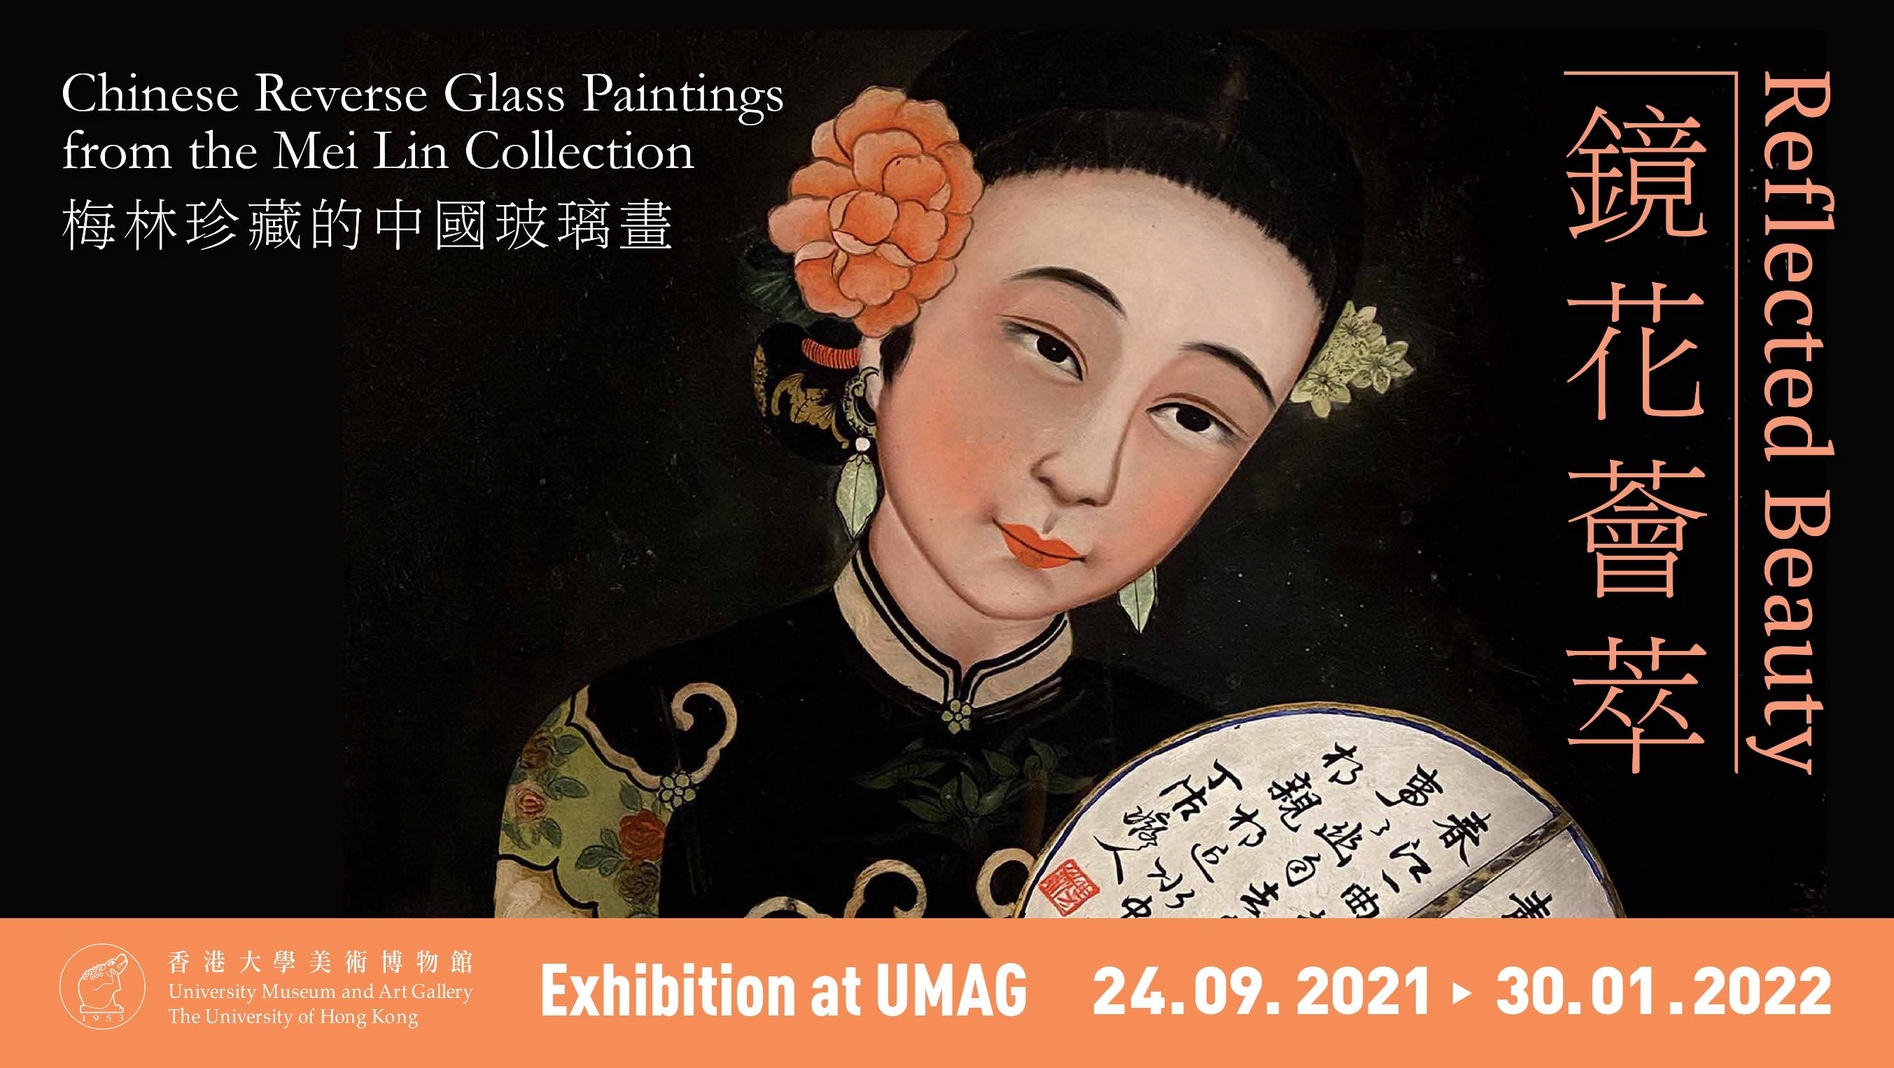 Reflected Beauty: Chinese Reverse Glass Paintings from the Mei Lin Collection 鏡花薈萃：梅林珍藏的中國玻璃畫